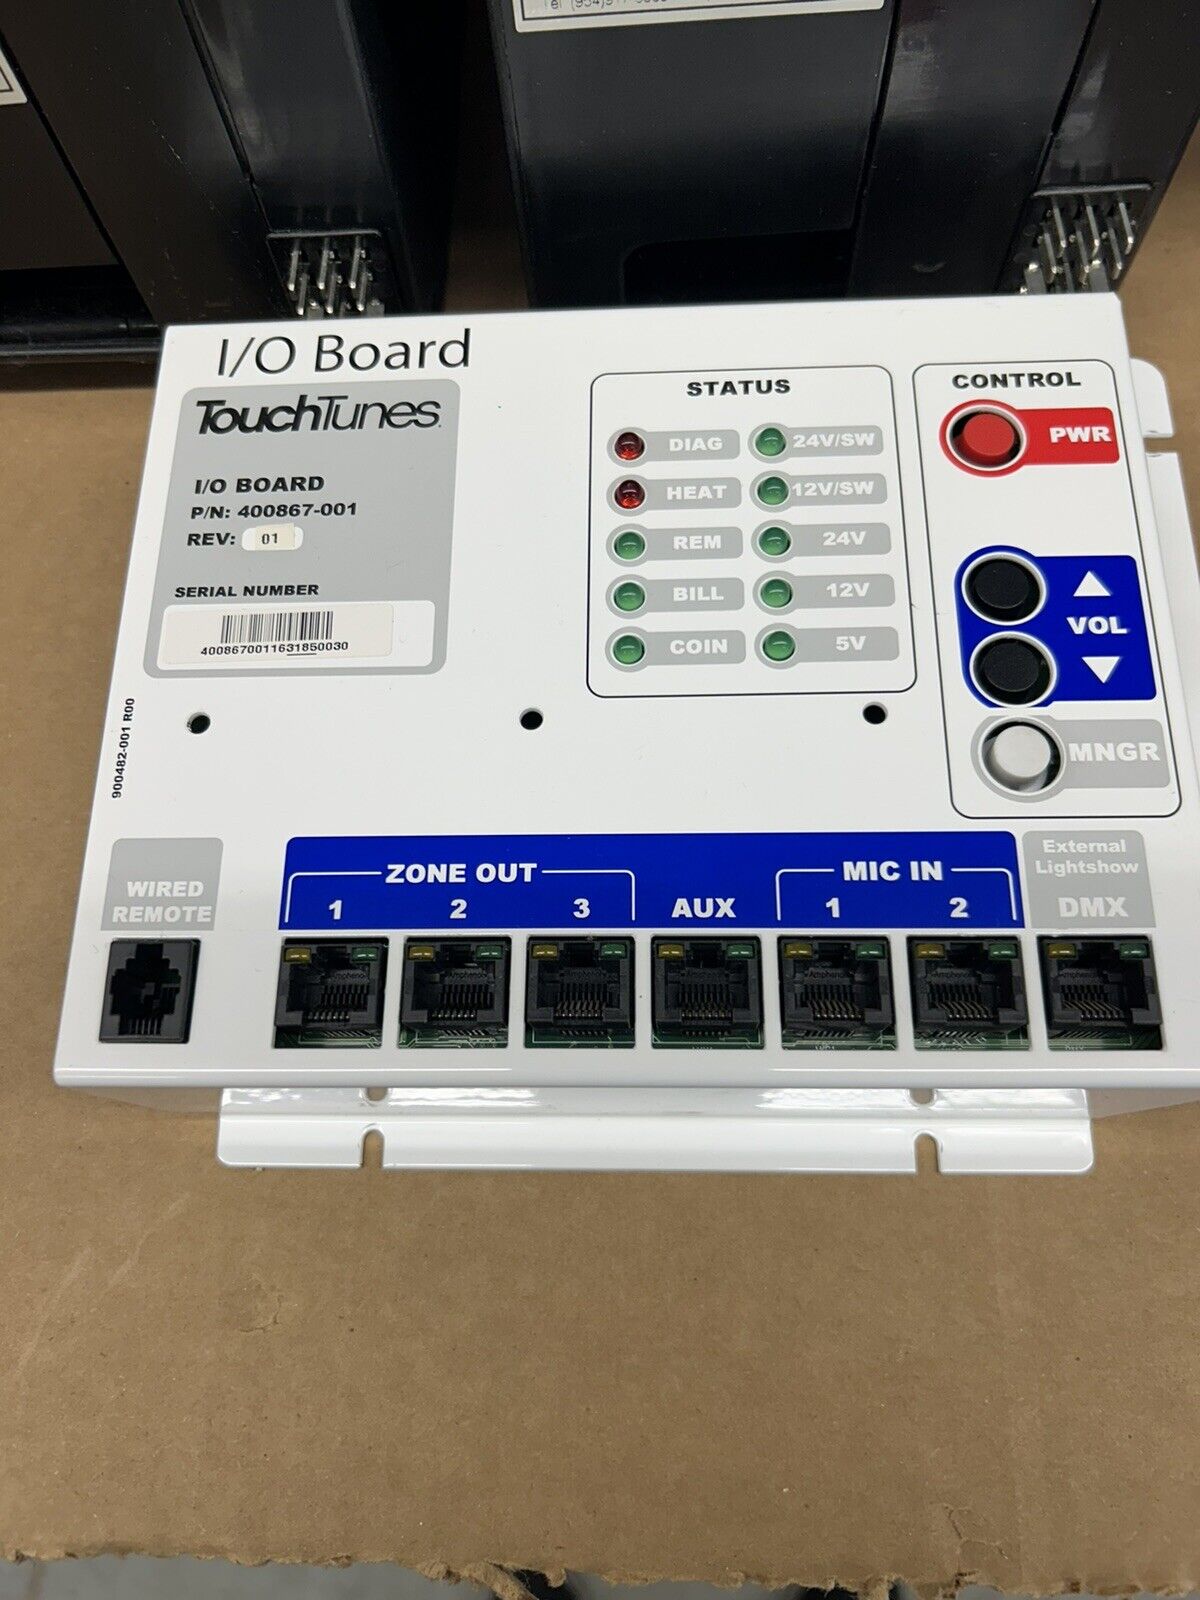 Touchtunes virtuo I/O PCB